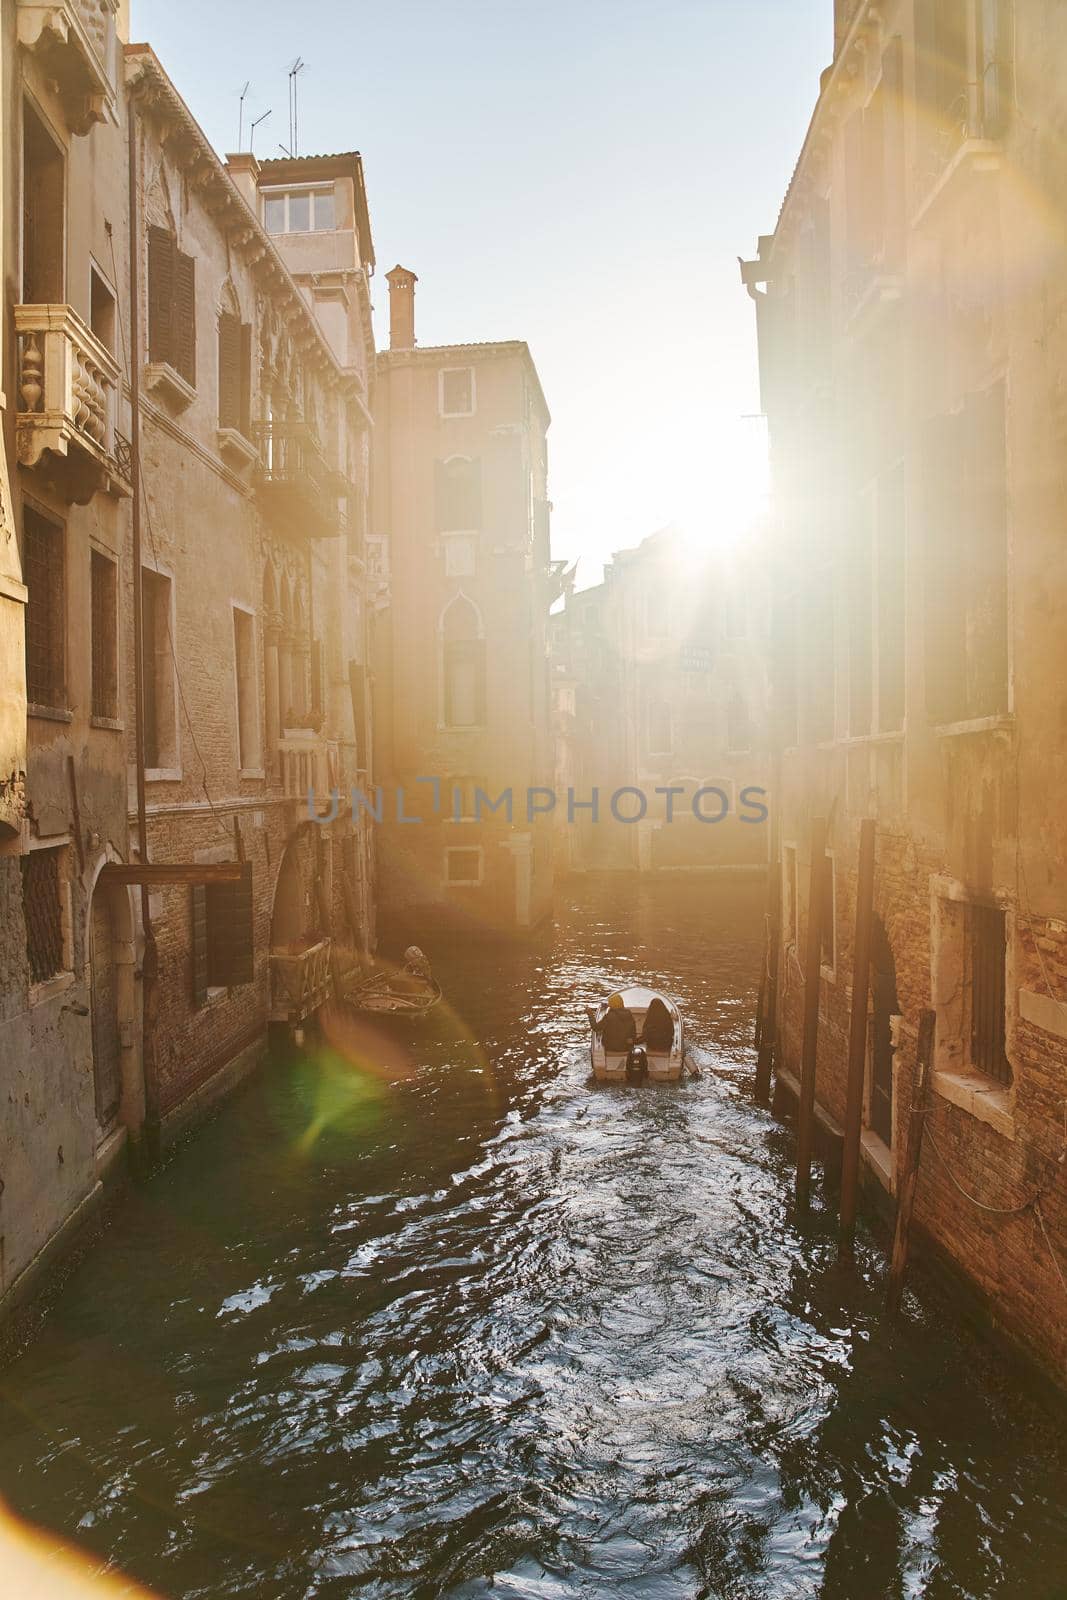 Venice, Italy - 10.12.2021: Traditional canal street with gondolas and boats in Venice, Italy. High quality photo